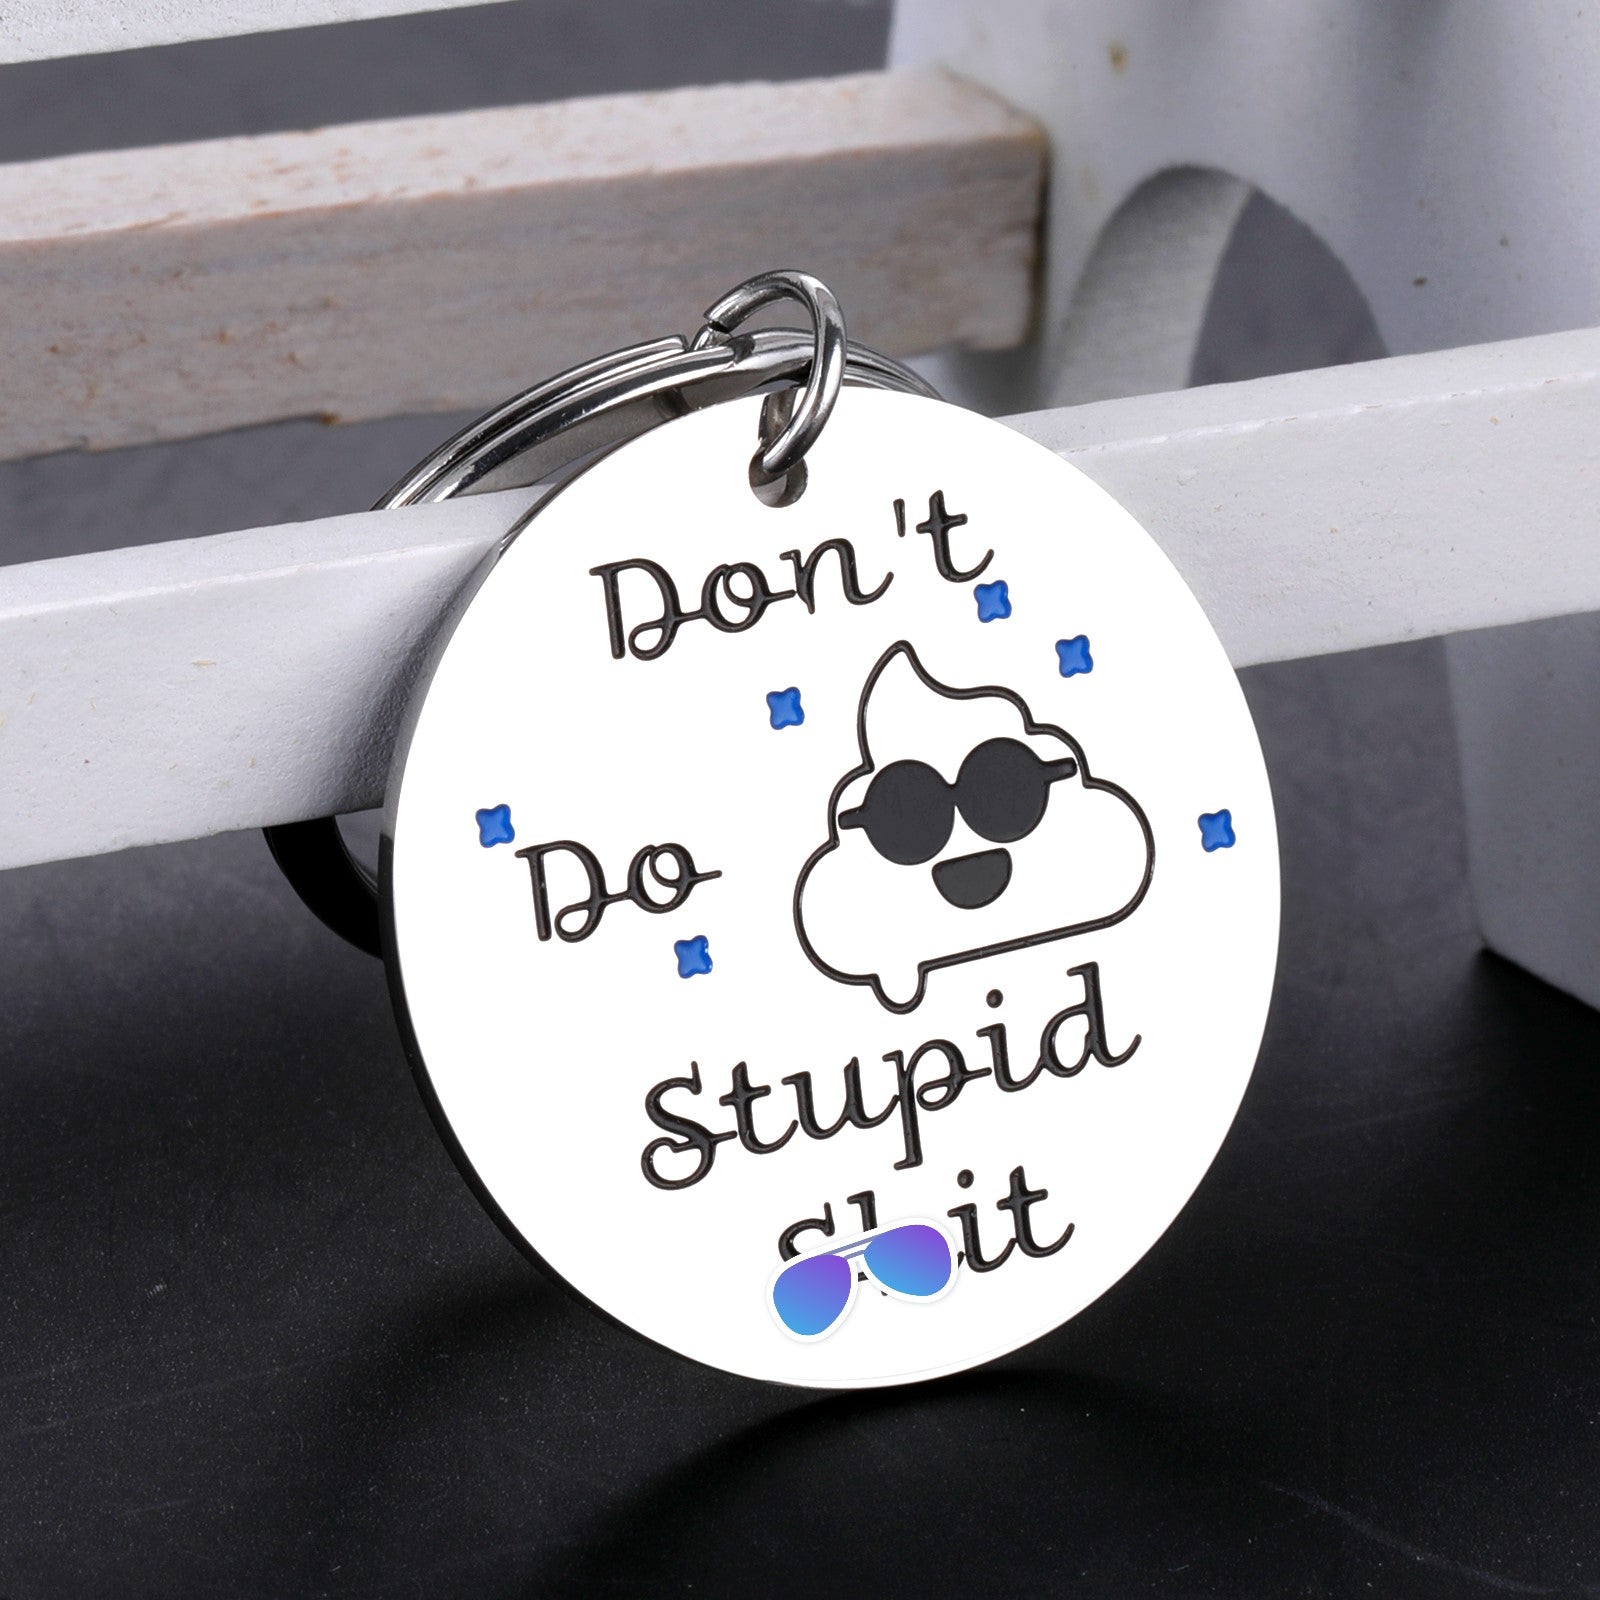 Funny Keychain For Son Daughter Graduation Gift From Mom Don't Do